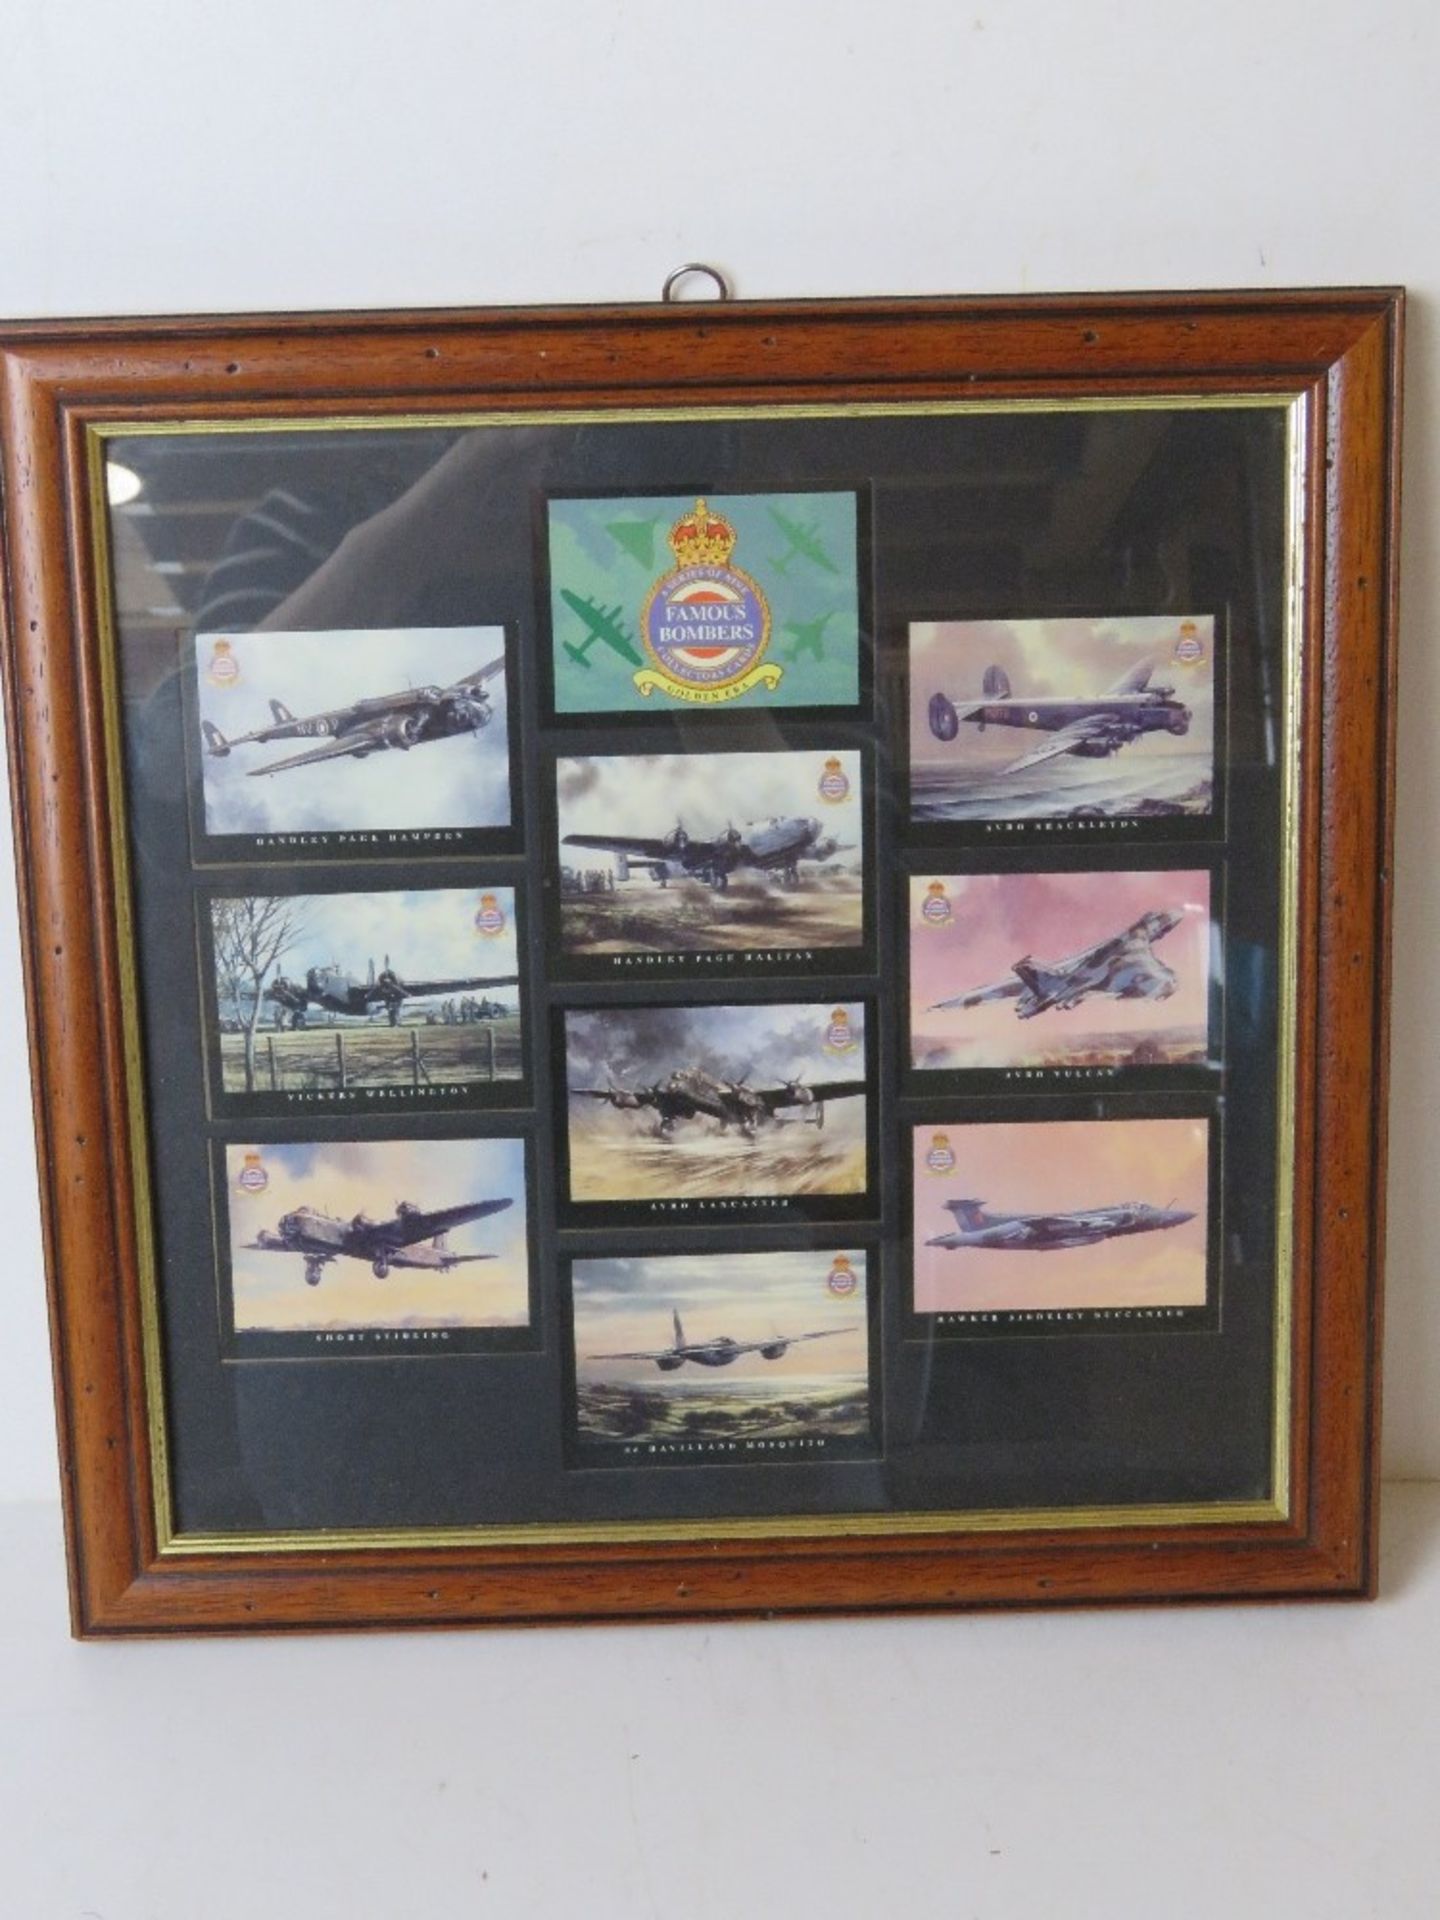 A framed set of Military themed 'Famous Bombers' cigarette cards.